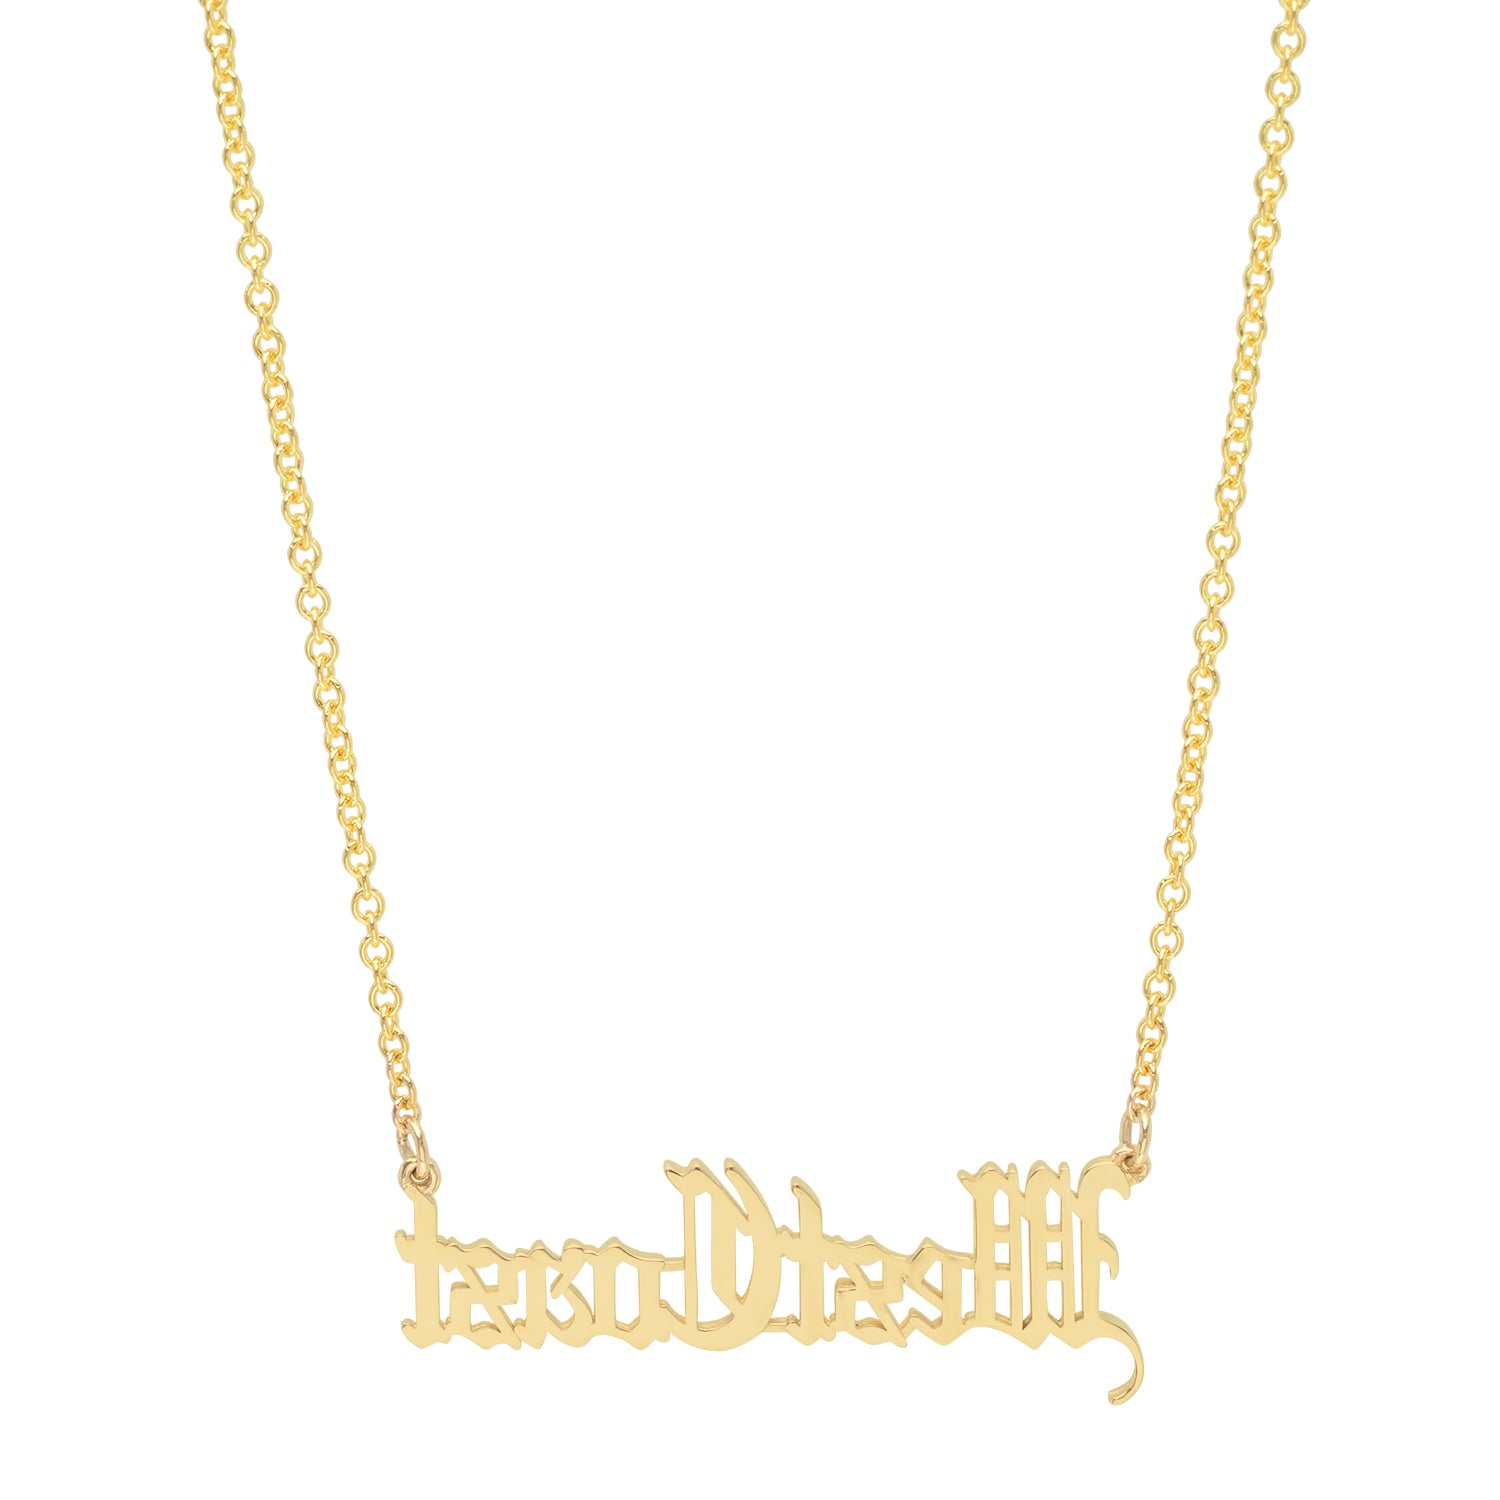 "West Coast" Old English Word Necklace